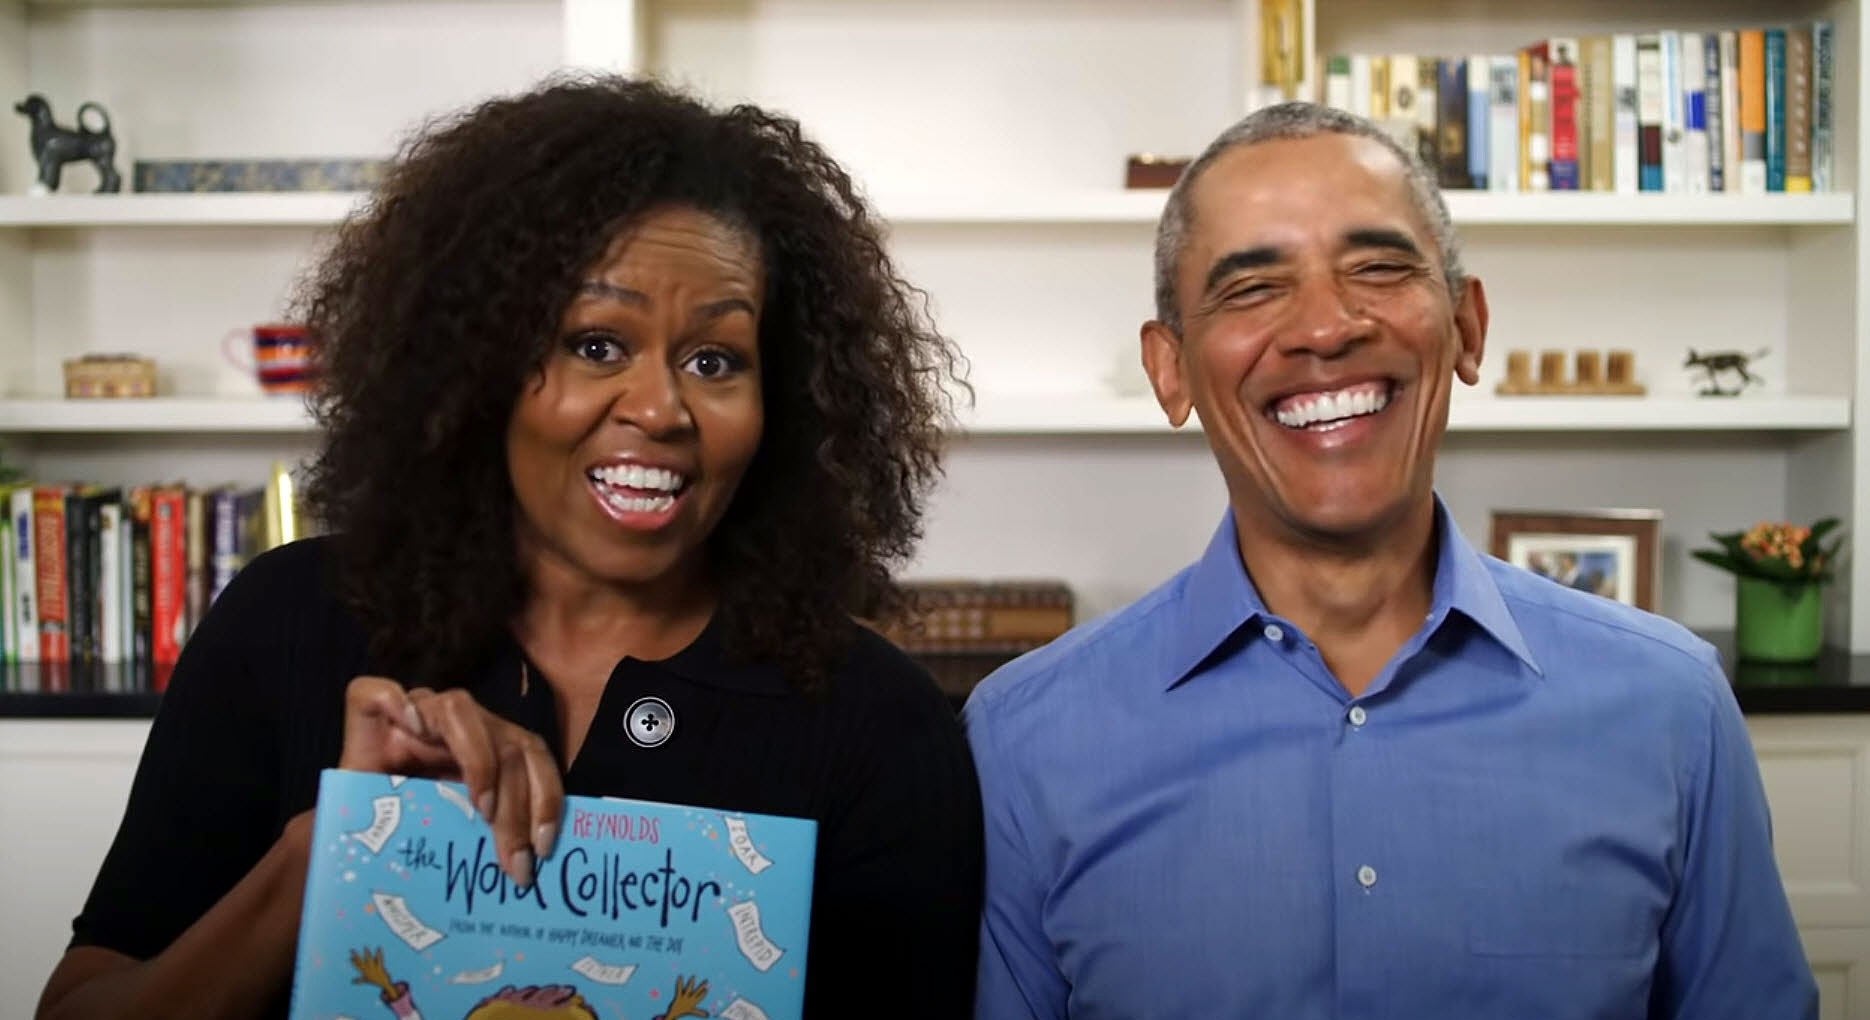 Michelle and Barack Obama Tease Each Other in Chicago Public Library Video